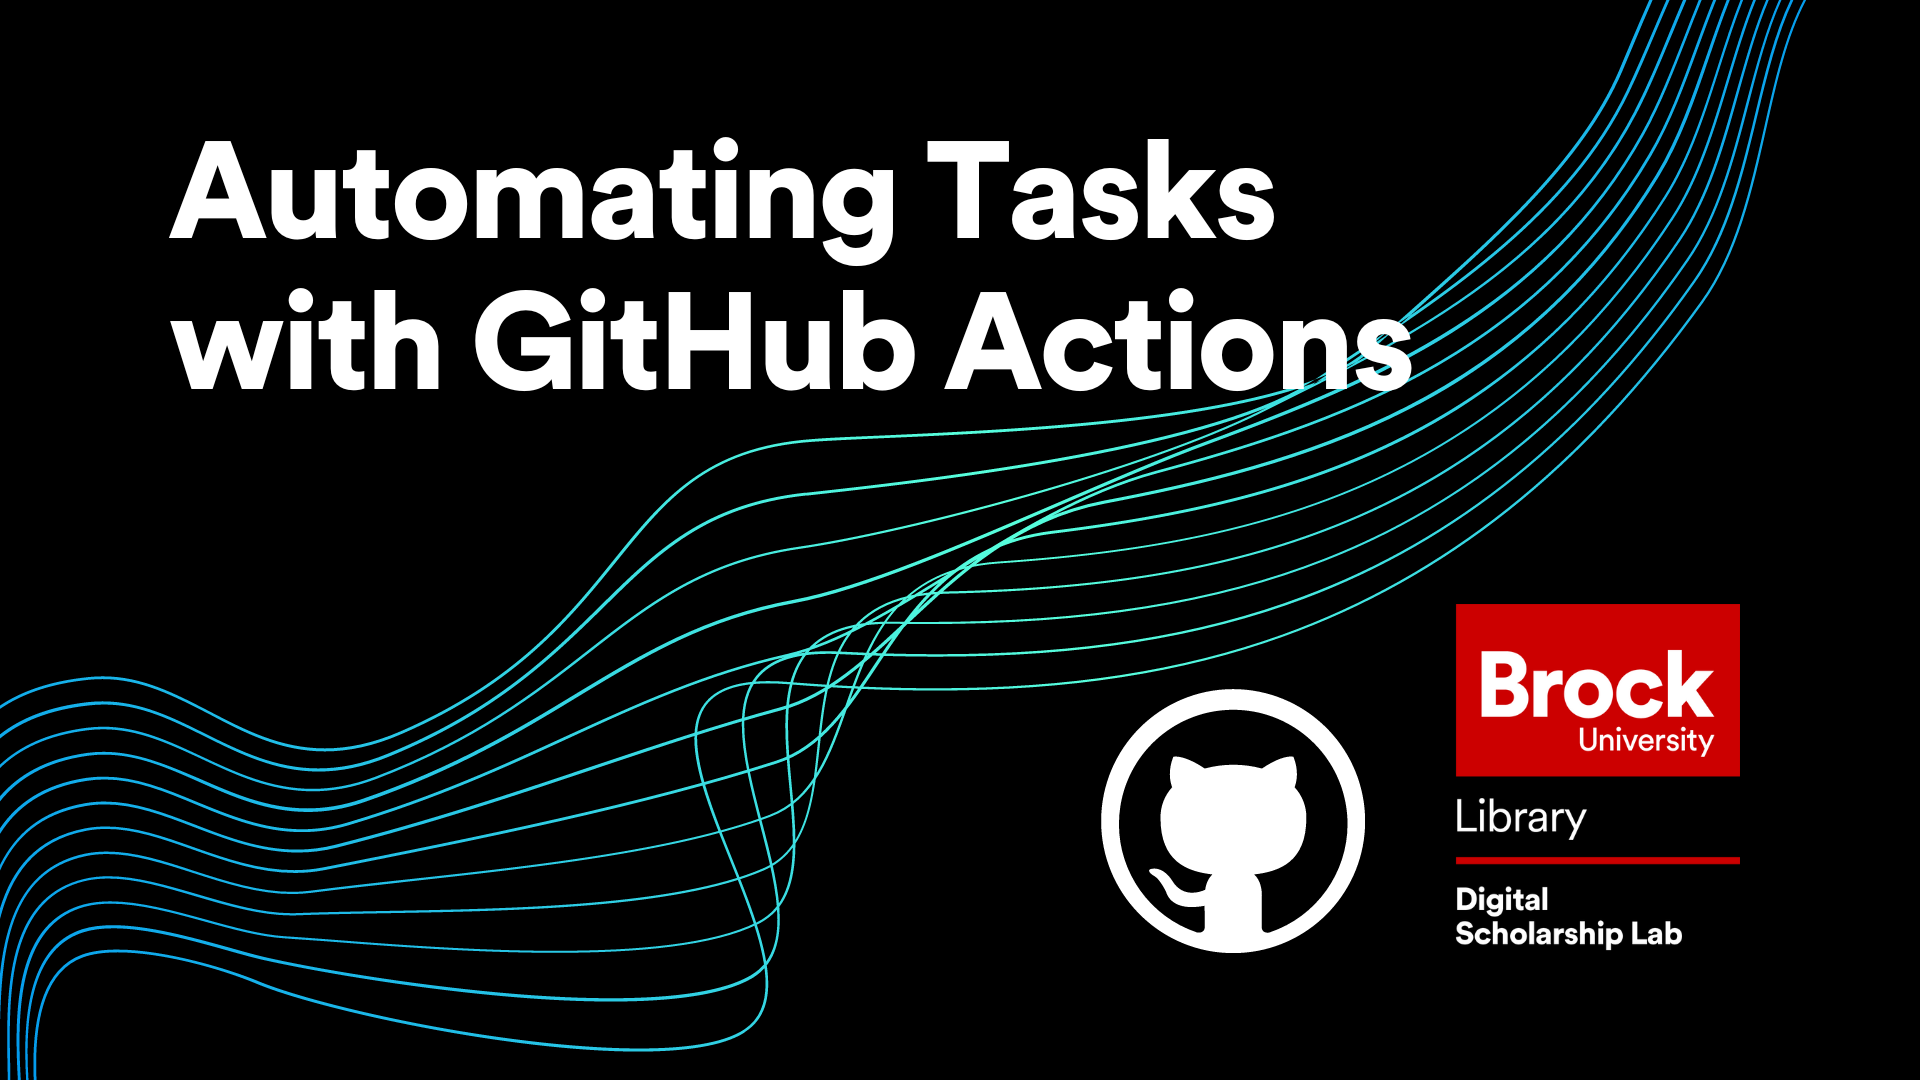 Automating tasks with GitHub Actions